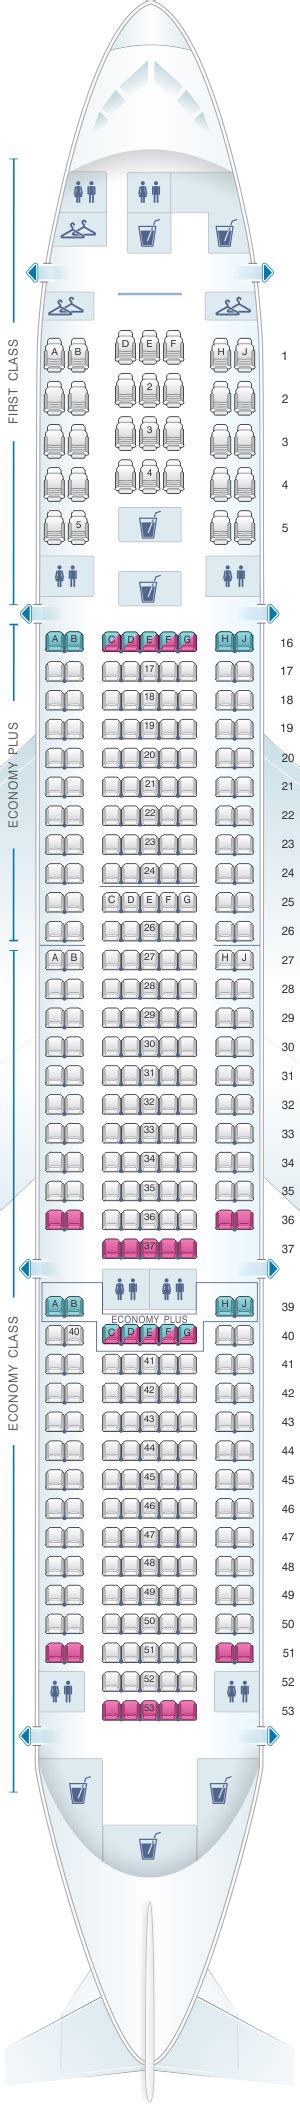 Seat map 777-200 united. The average age of United’s B777 fleet is 15,5 years. When ranked for the age of the aircraft, United Airlines is 59th on 67 airlines operating the Boeing 777. The Boeing 777 has a cruise speed of 550 mph (885 km/h) and a wing span of 199 feet and 11 inches (60,1 m). United is the 2nd largest B777 operator in the world. 